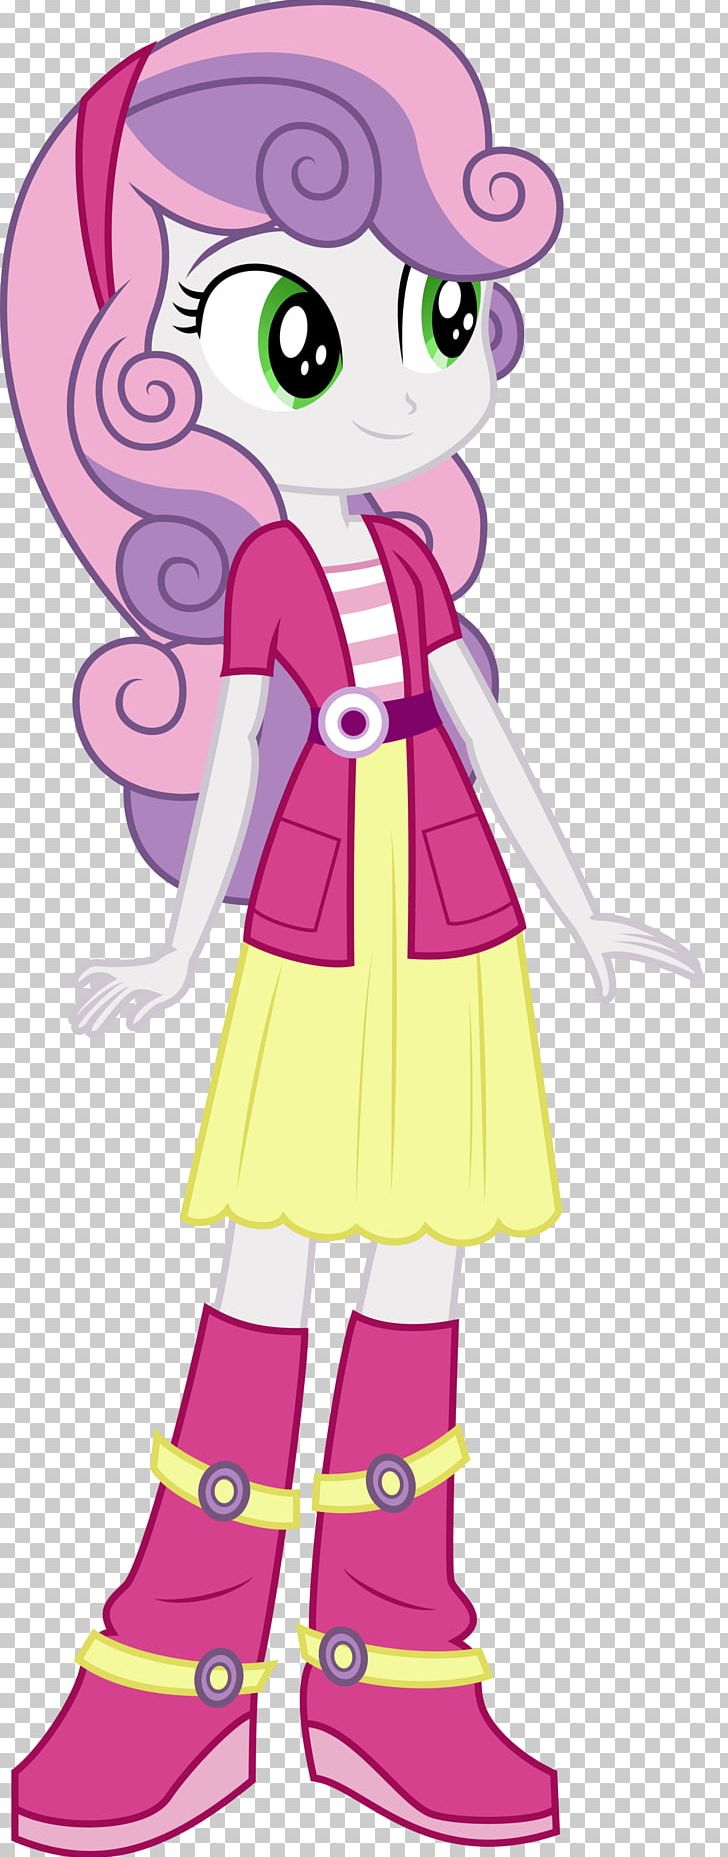 Rarity Sweetie Belle Rainbow Dash Twilight Sparkle Fluttershy PNG, Clipart, Applejack, Cartoon, Cutie Mark Crusaders, Equestria, Fictional Character Free PNG Download